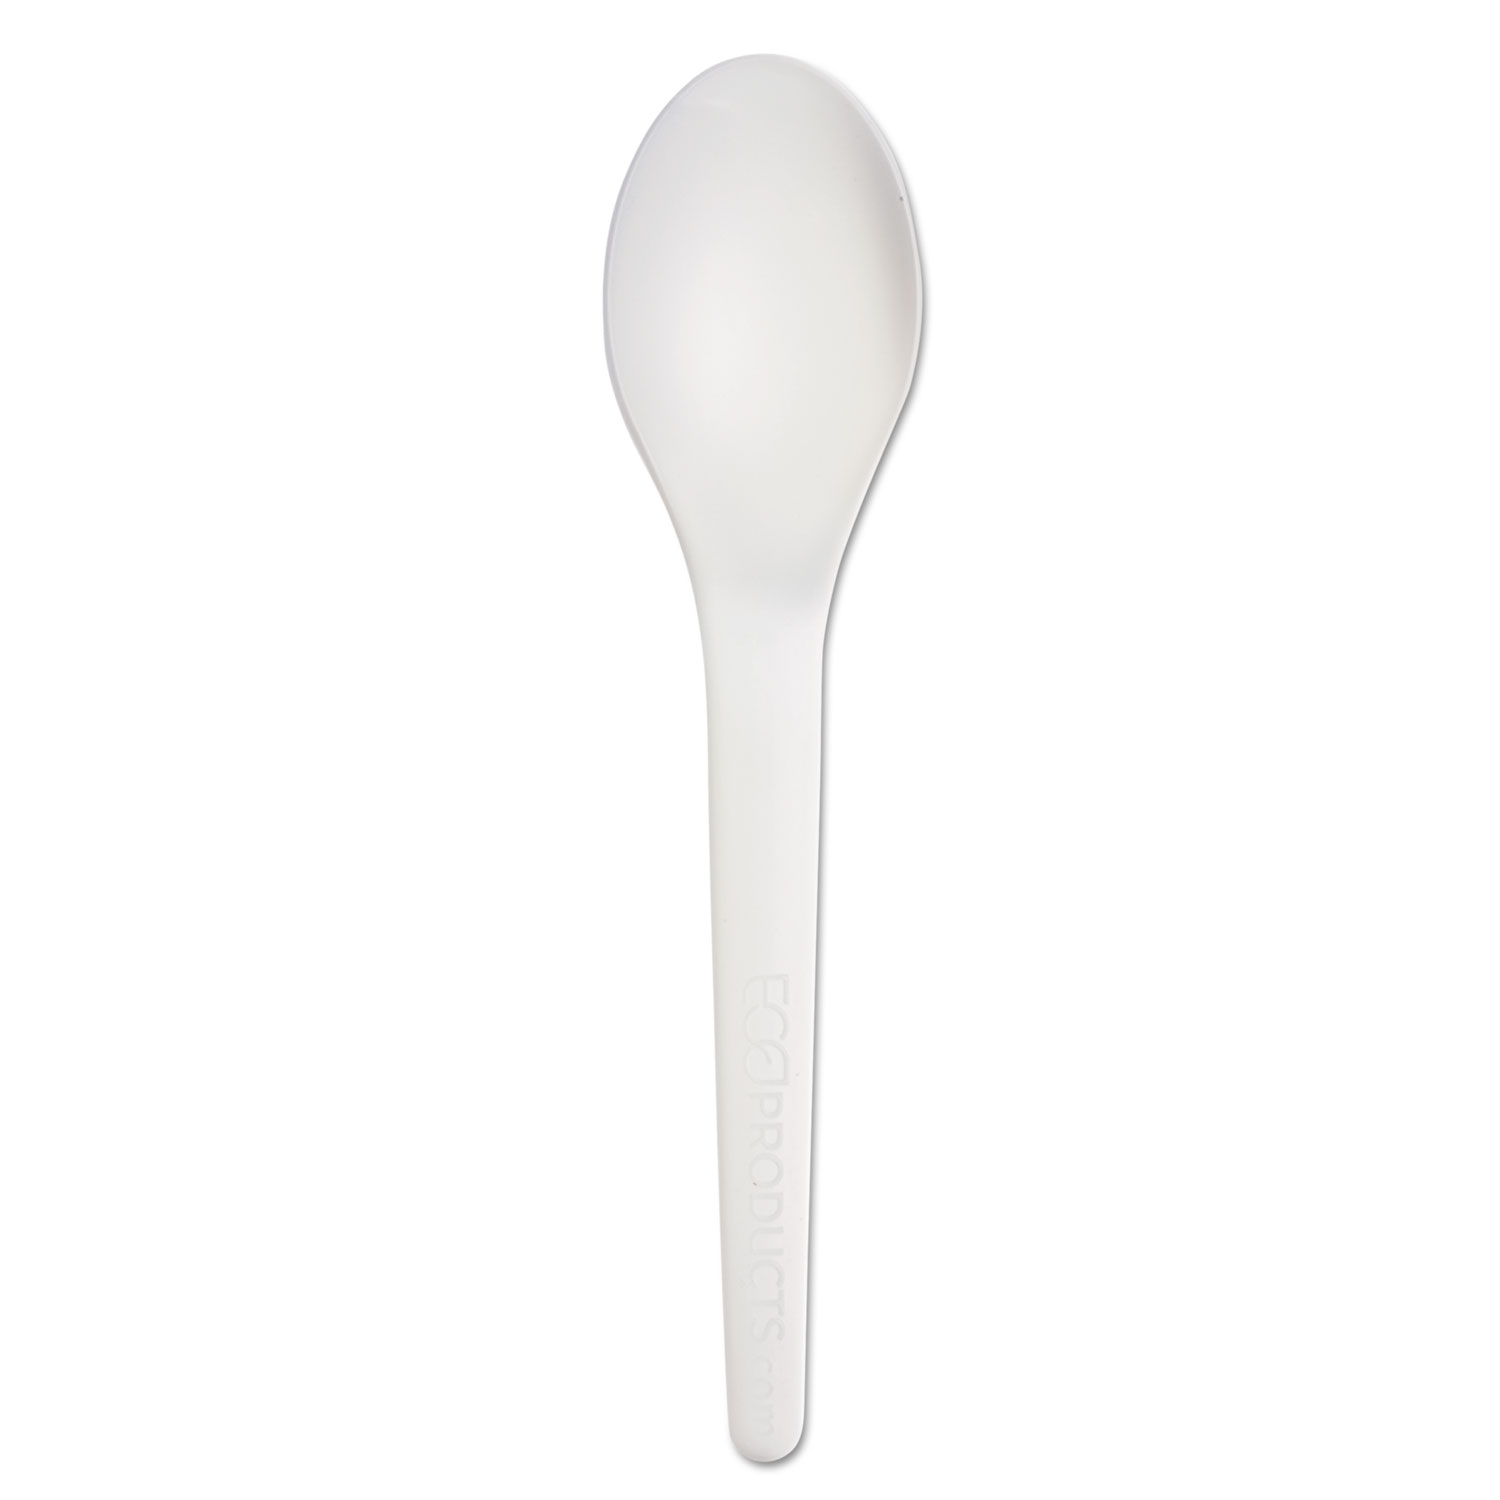  Eco-Products EP-S013 Plantware Renewable & Compostable Spoon - 6, 50/Pack, 20 Pack/Carton (ECOEPS013) 